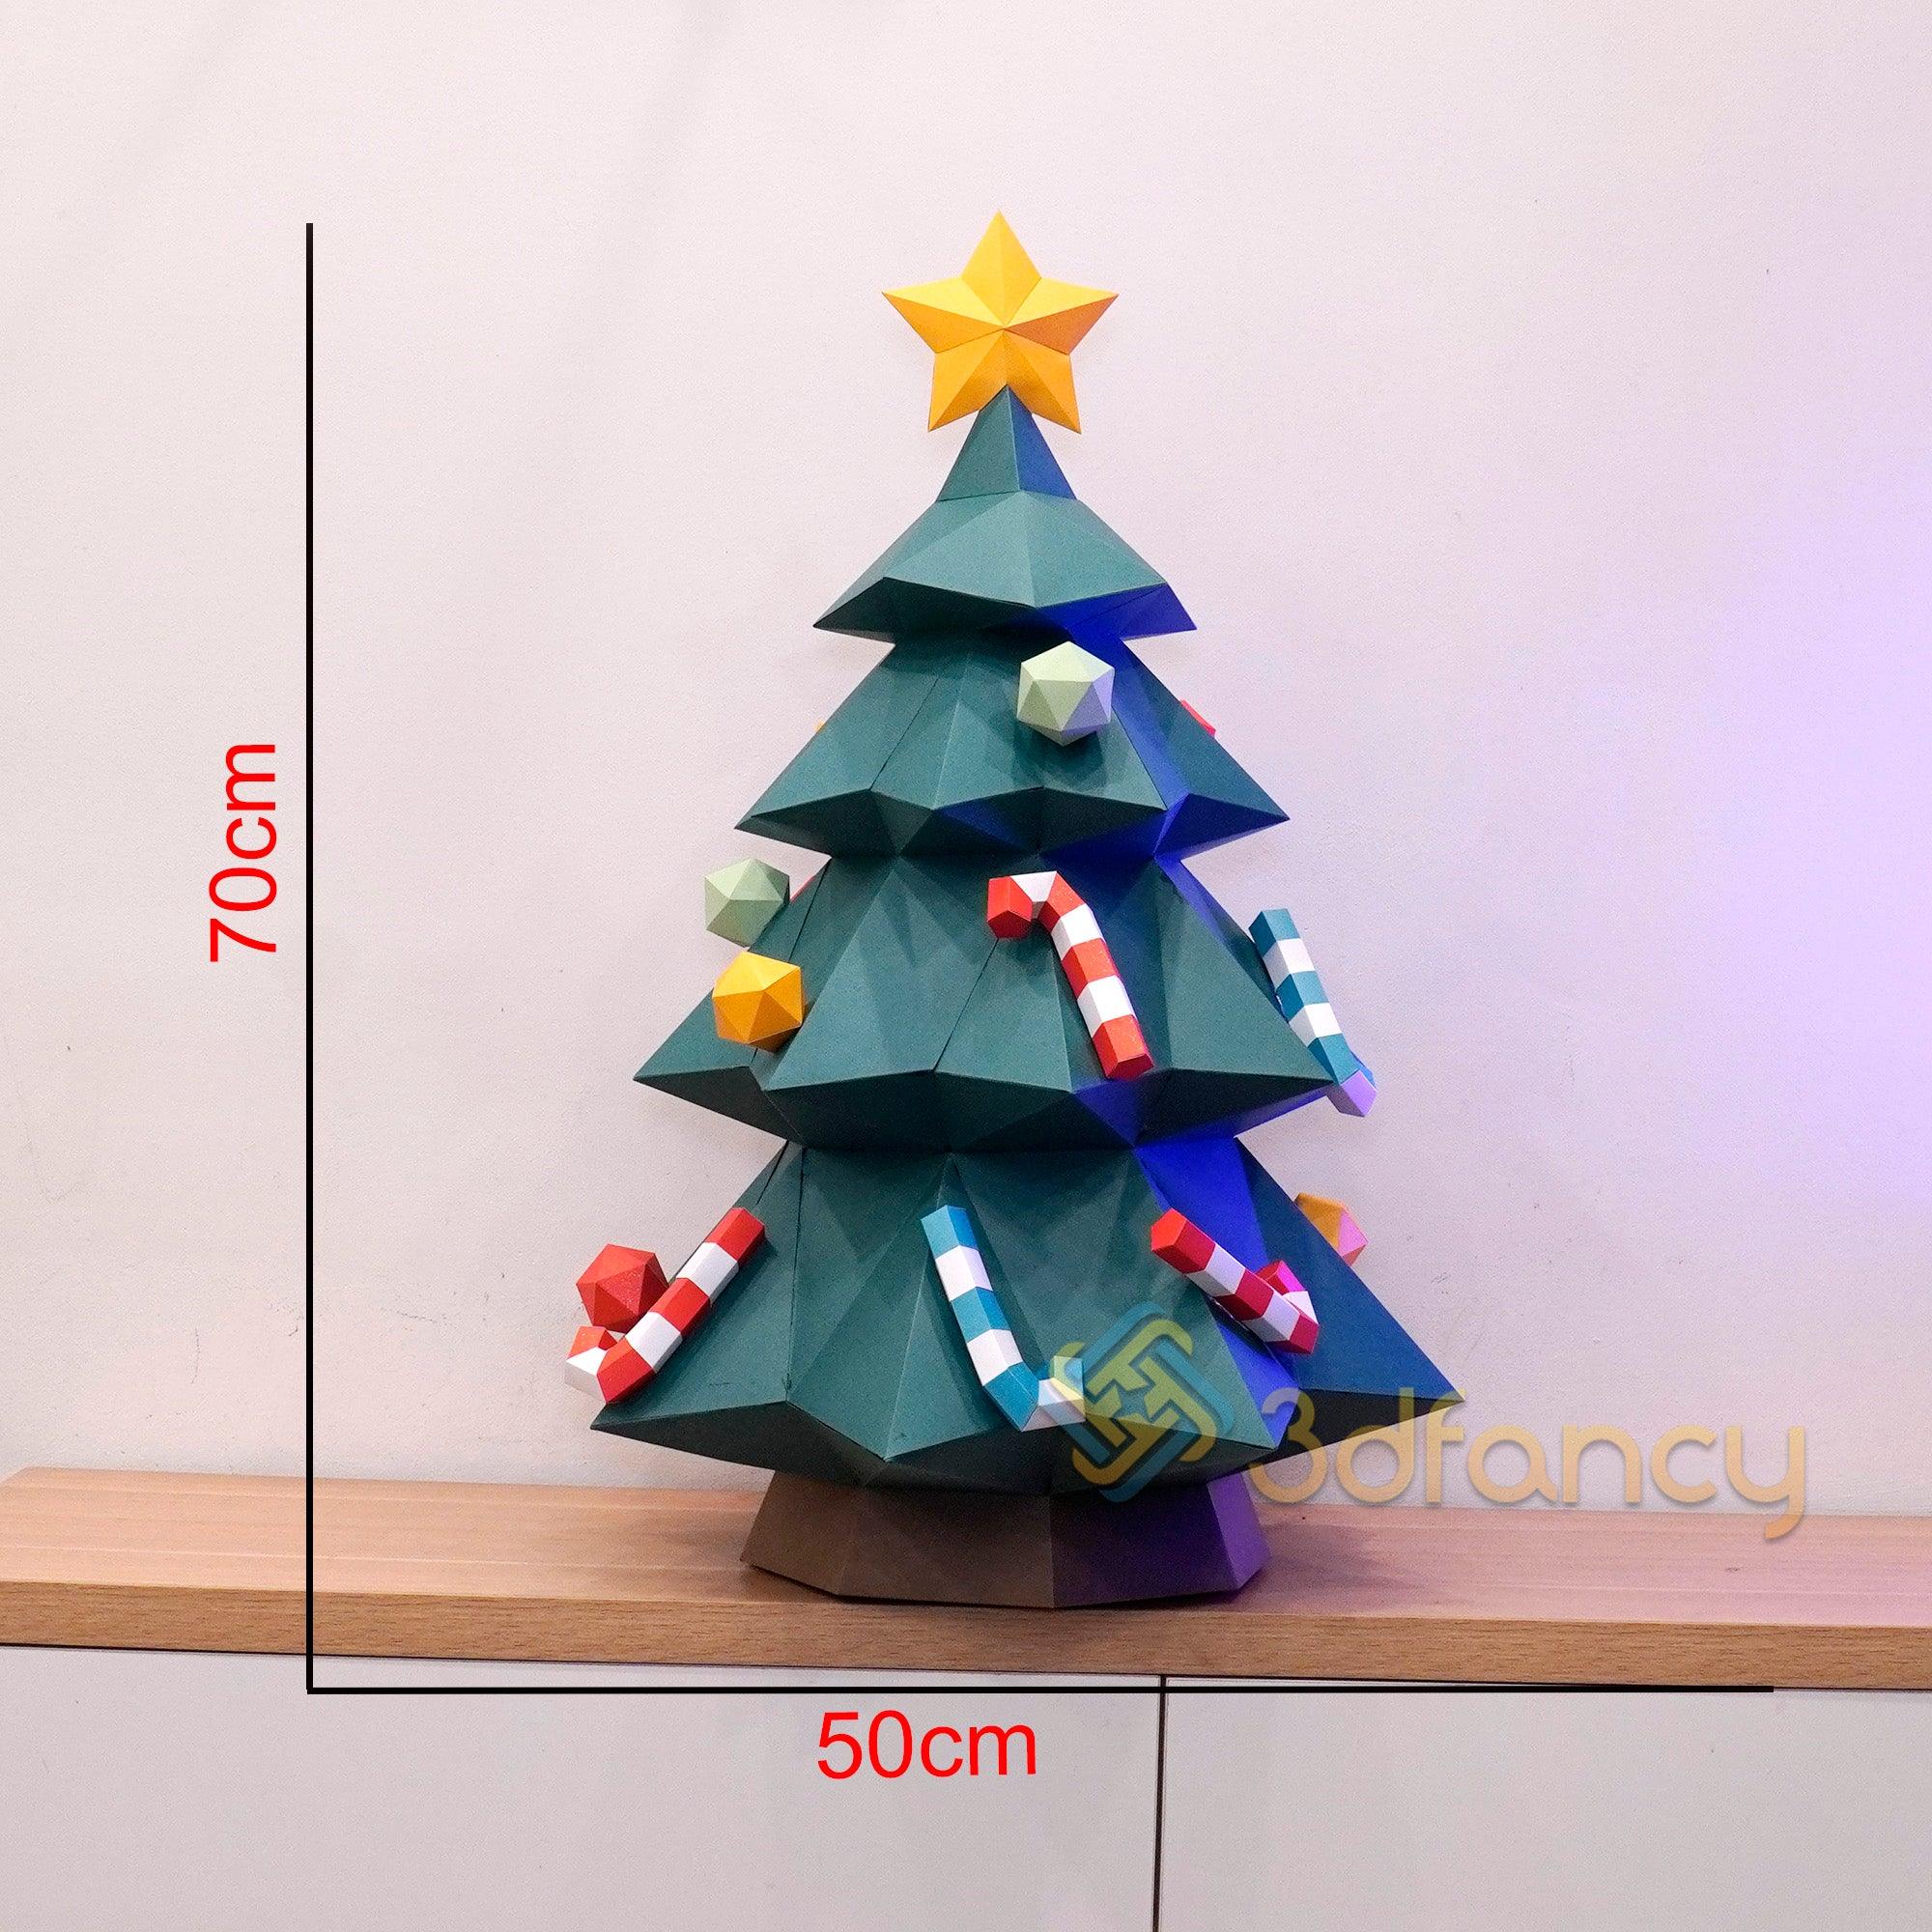 DIY Big Christmas Tree Papercraft 3D PDF SVG Silhouette Template for creating Christmas home decor Low poly Tree Model Origami Pattern Craft - 3dfancy